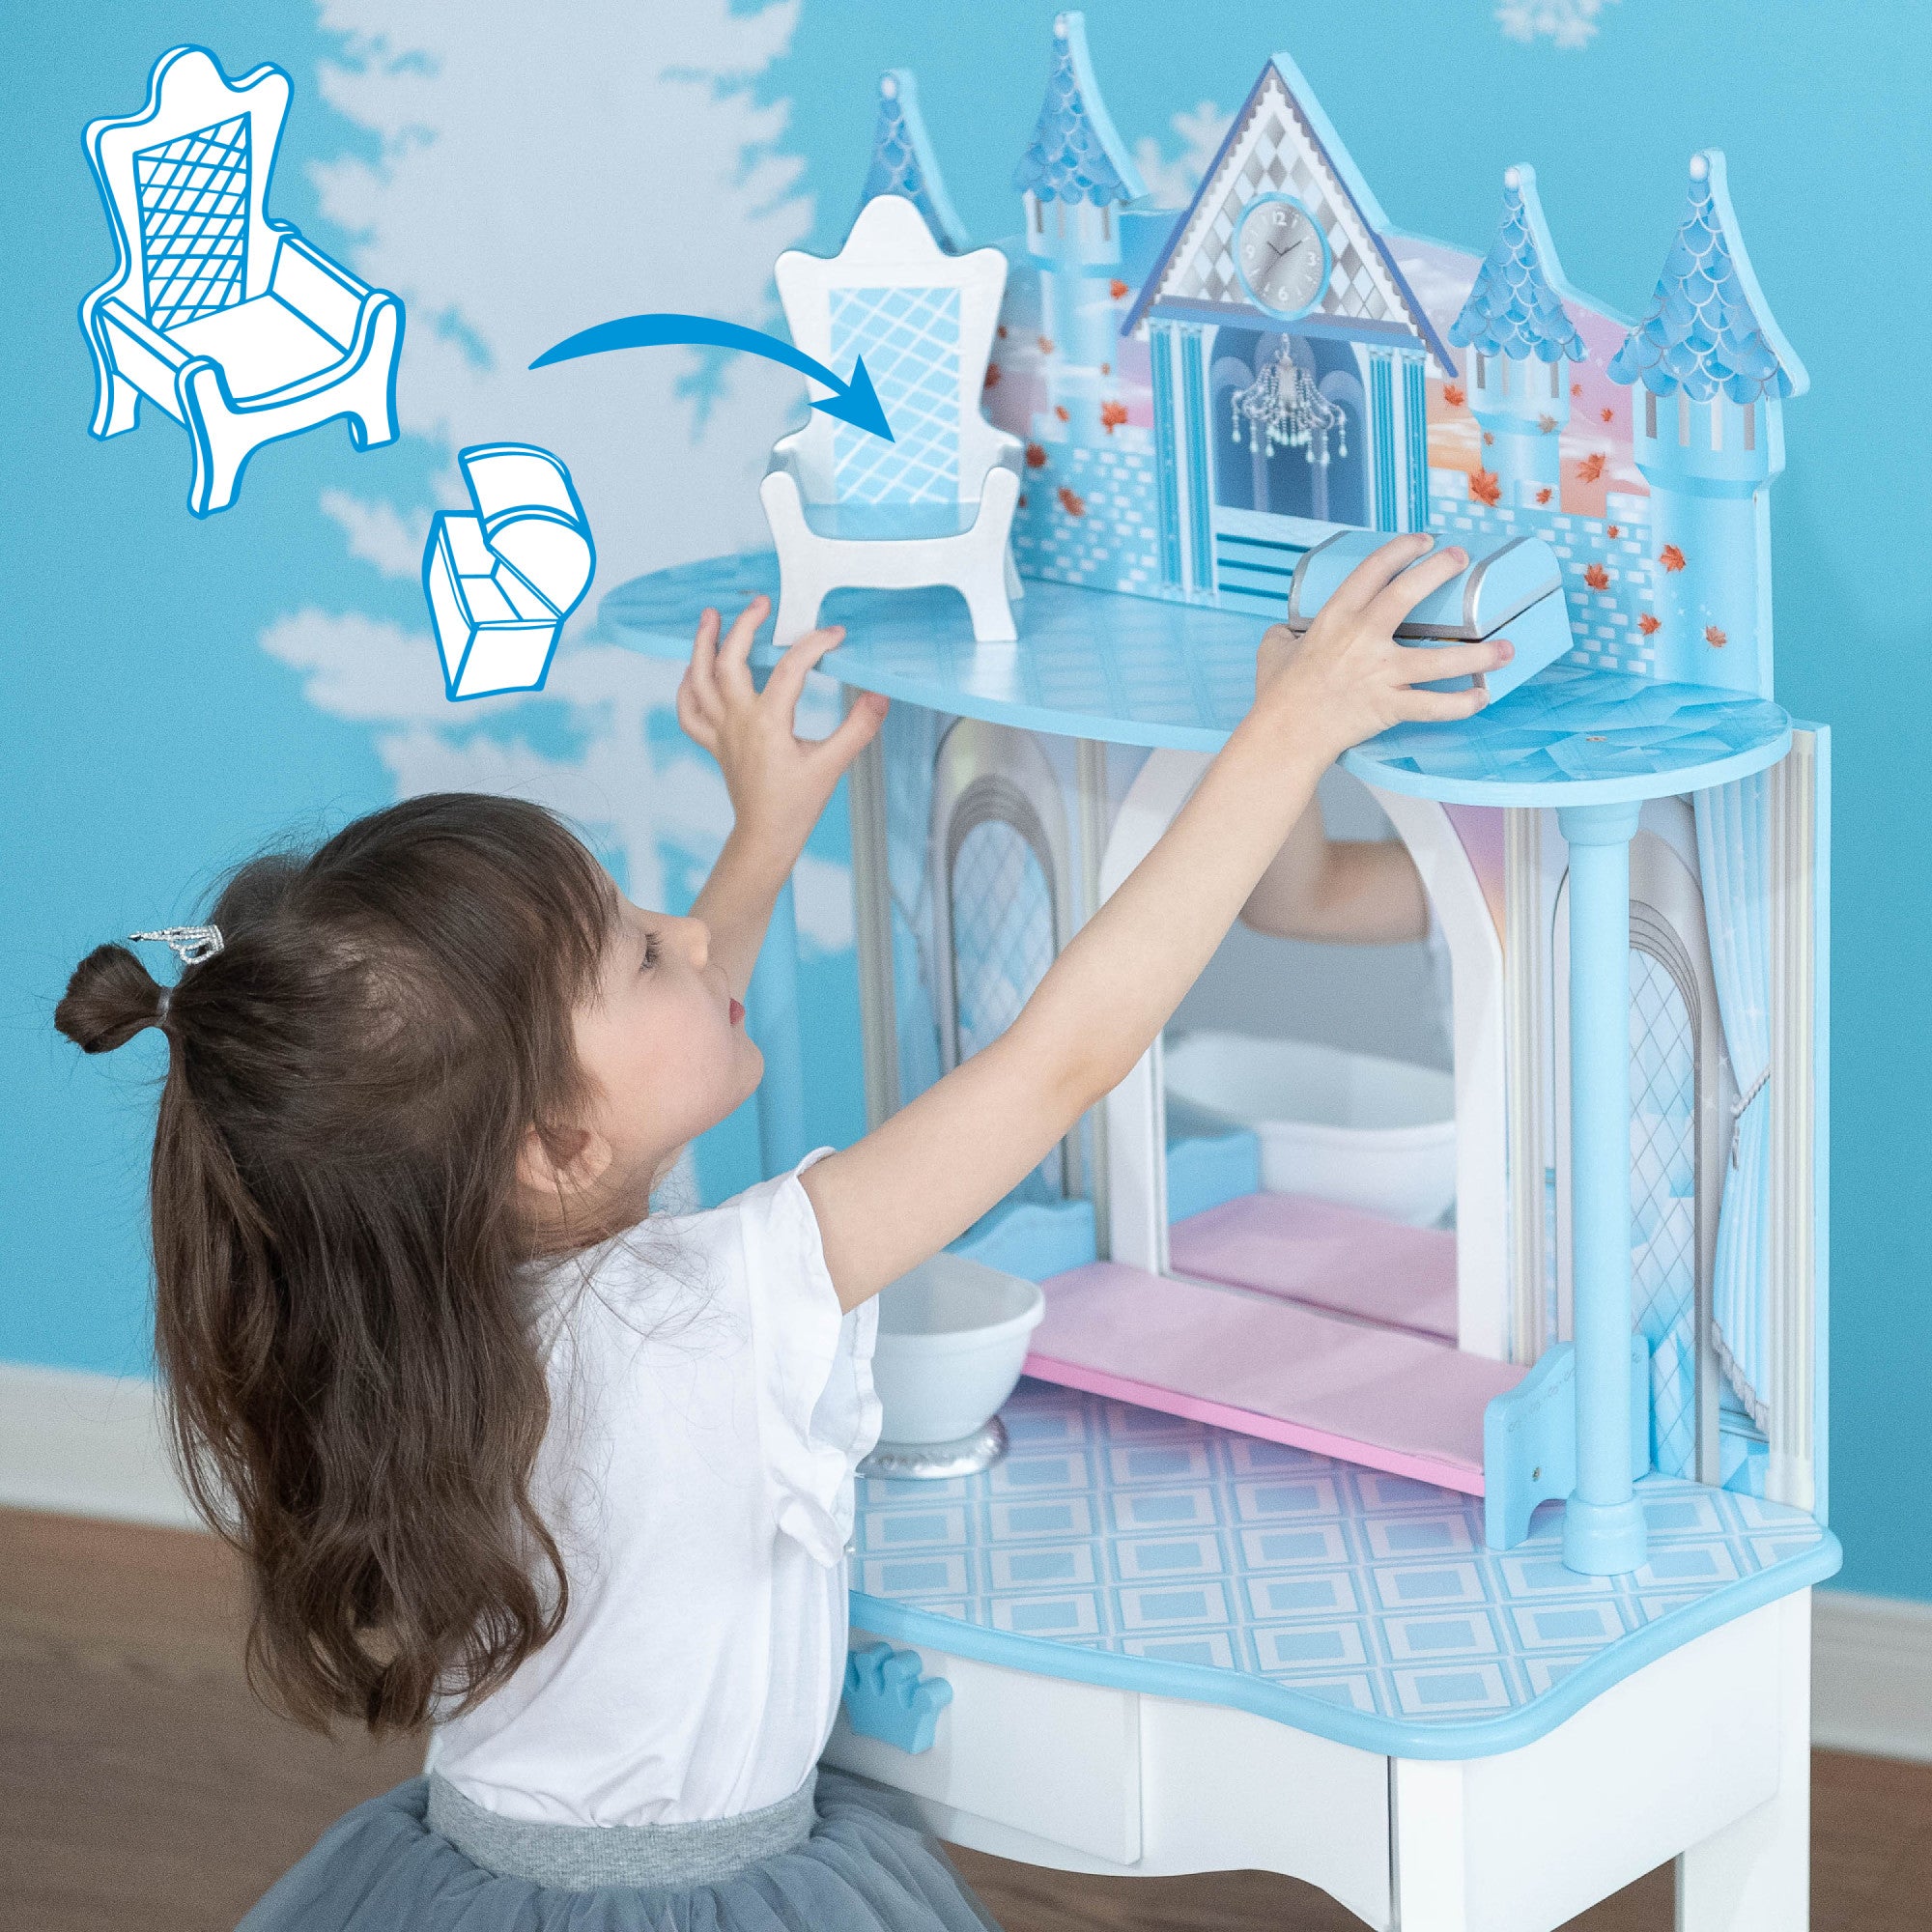 Fantasy Fields Kids Dreamland Castle Vanity Set with Chair and Accessories, White/Blue